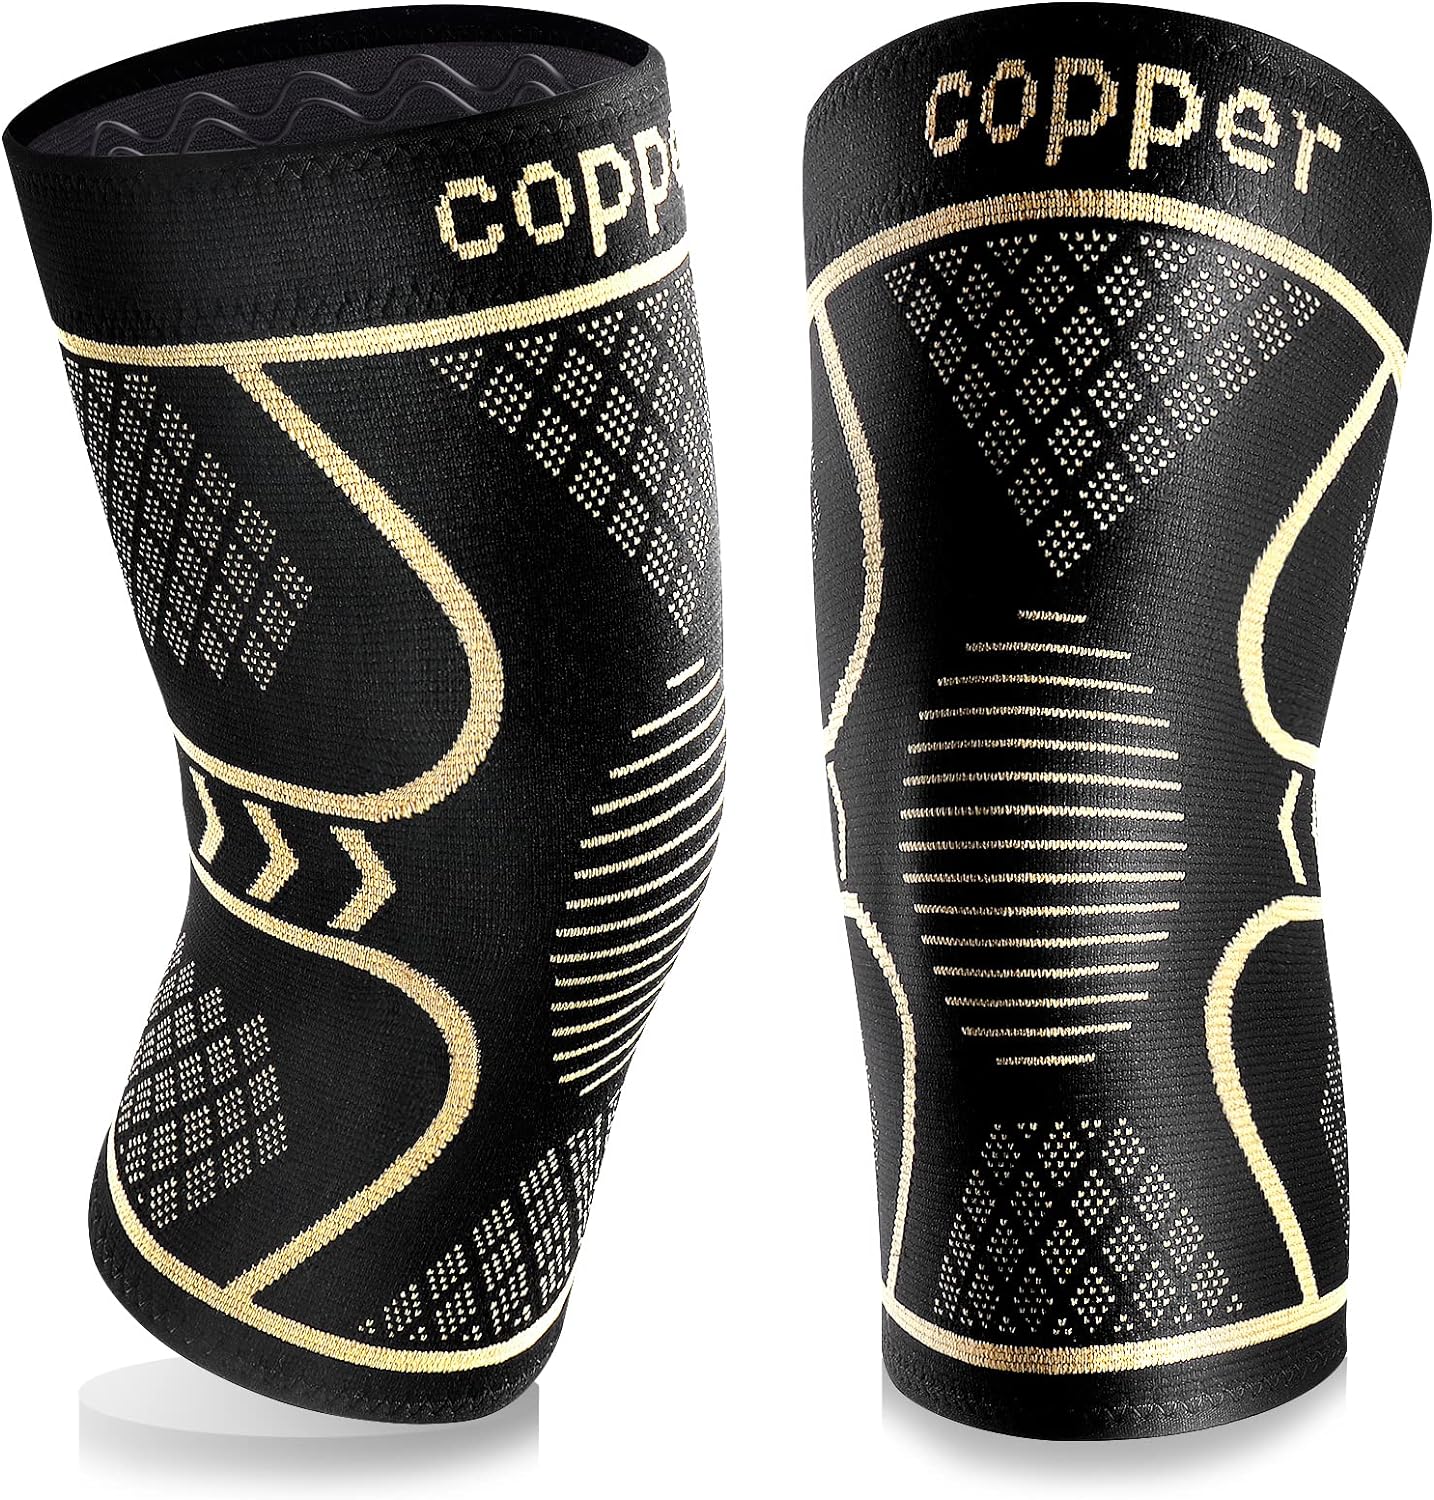 Copper Knee Braces for Women and Men 2 Pack, Knee Compression Sleeve for Knee Pain, Arthritis,ACL, Meniscus Tear, Joint Pain Relief, Knee Support for Running, Working Out, Fitness, Weightlifting